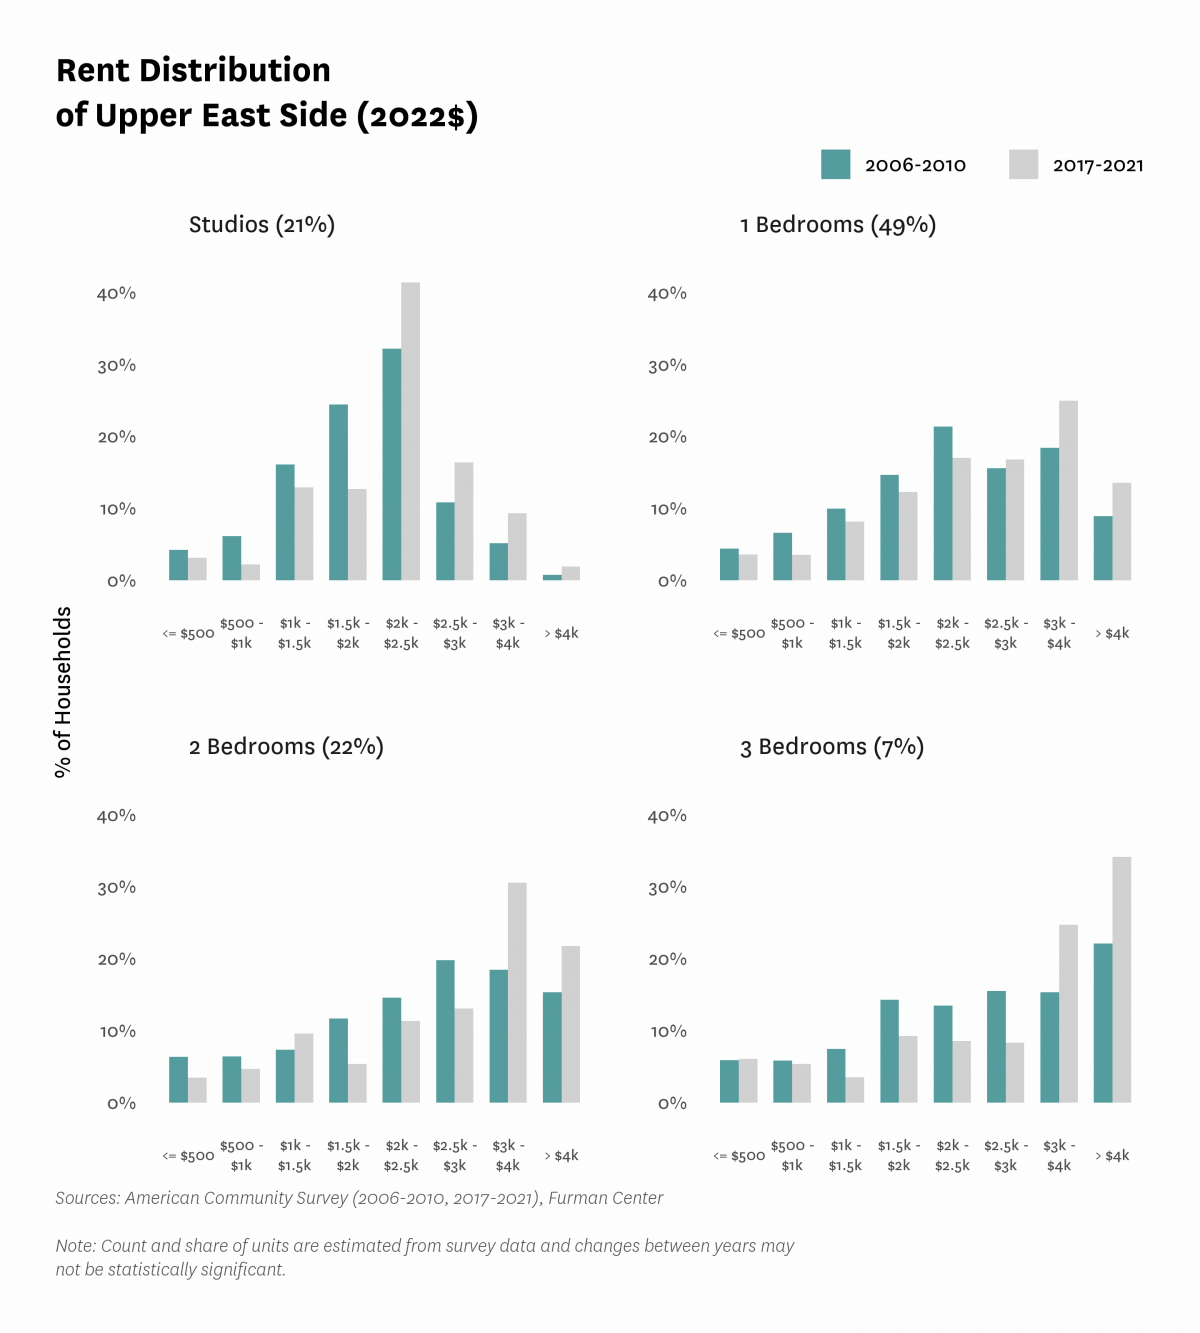 Graph showing the distribution of rents in Upper East Side in both 2010 and 2017-2021.